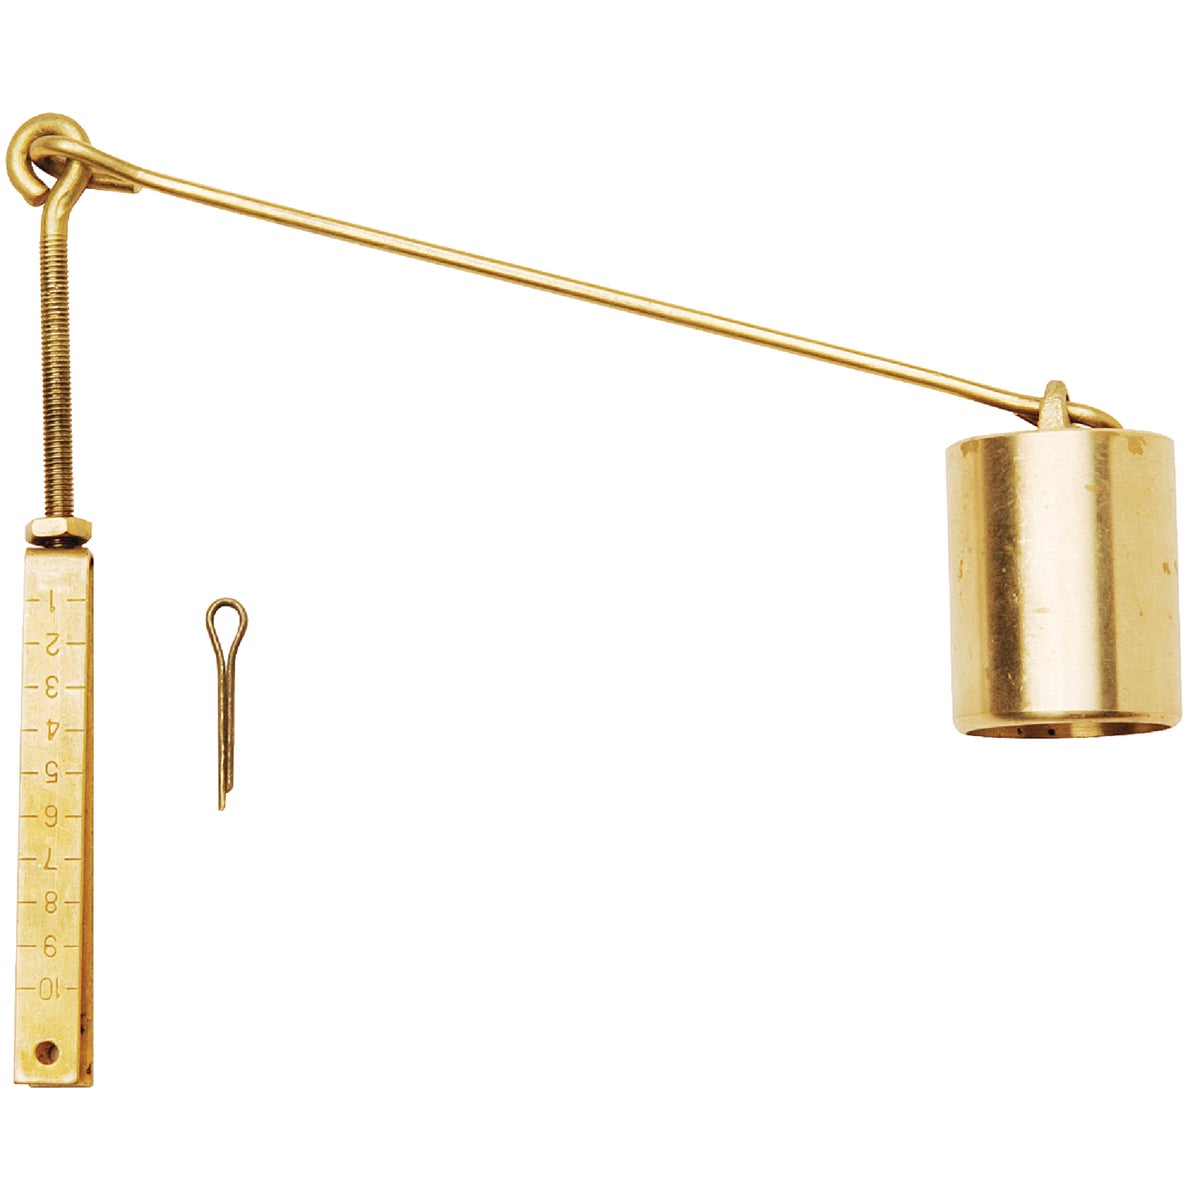 Item 443817, Brass linkage assembly for trip lever.